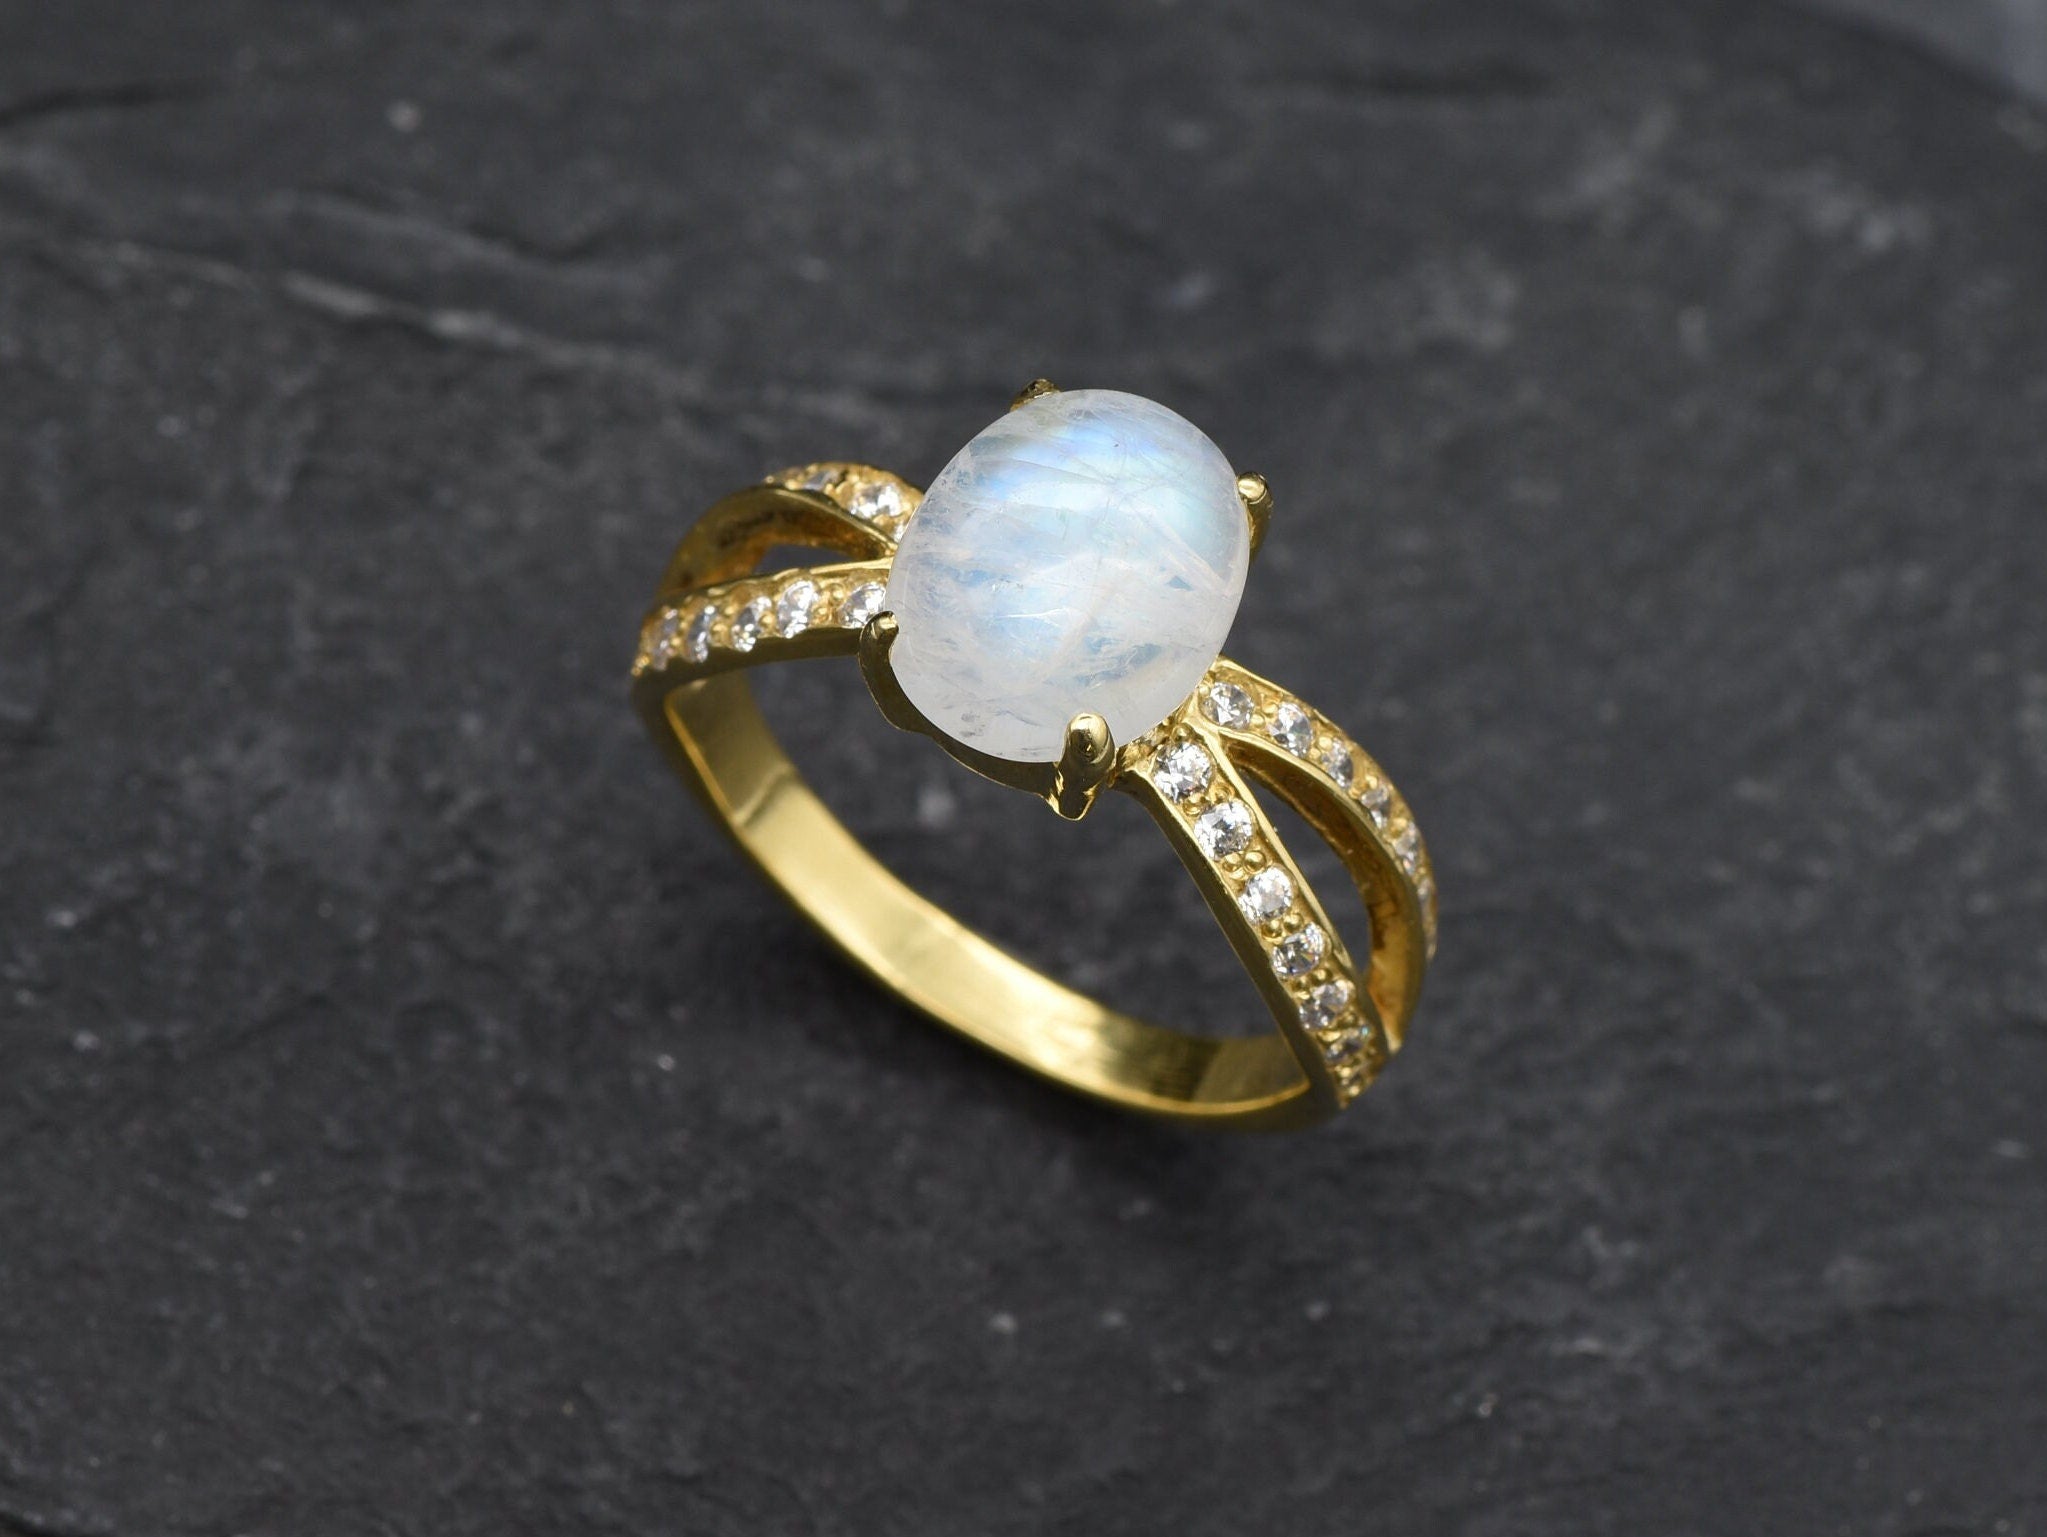 Gold Moonstone Ring, Moonstone Ring, Natural Moonstone, June Birthstone, Engagement Ring, Vintage Ring, Gold Solitaire Ring, 925 Silver Ring